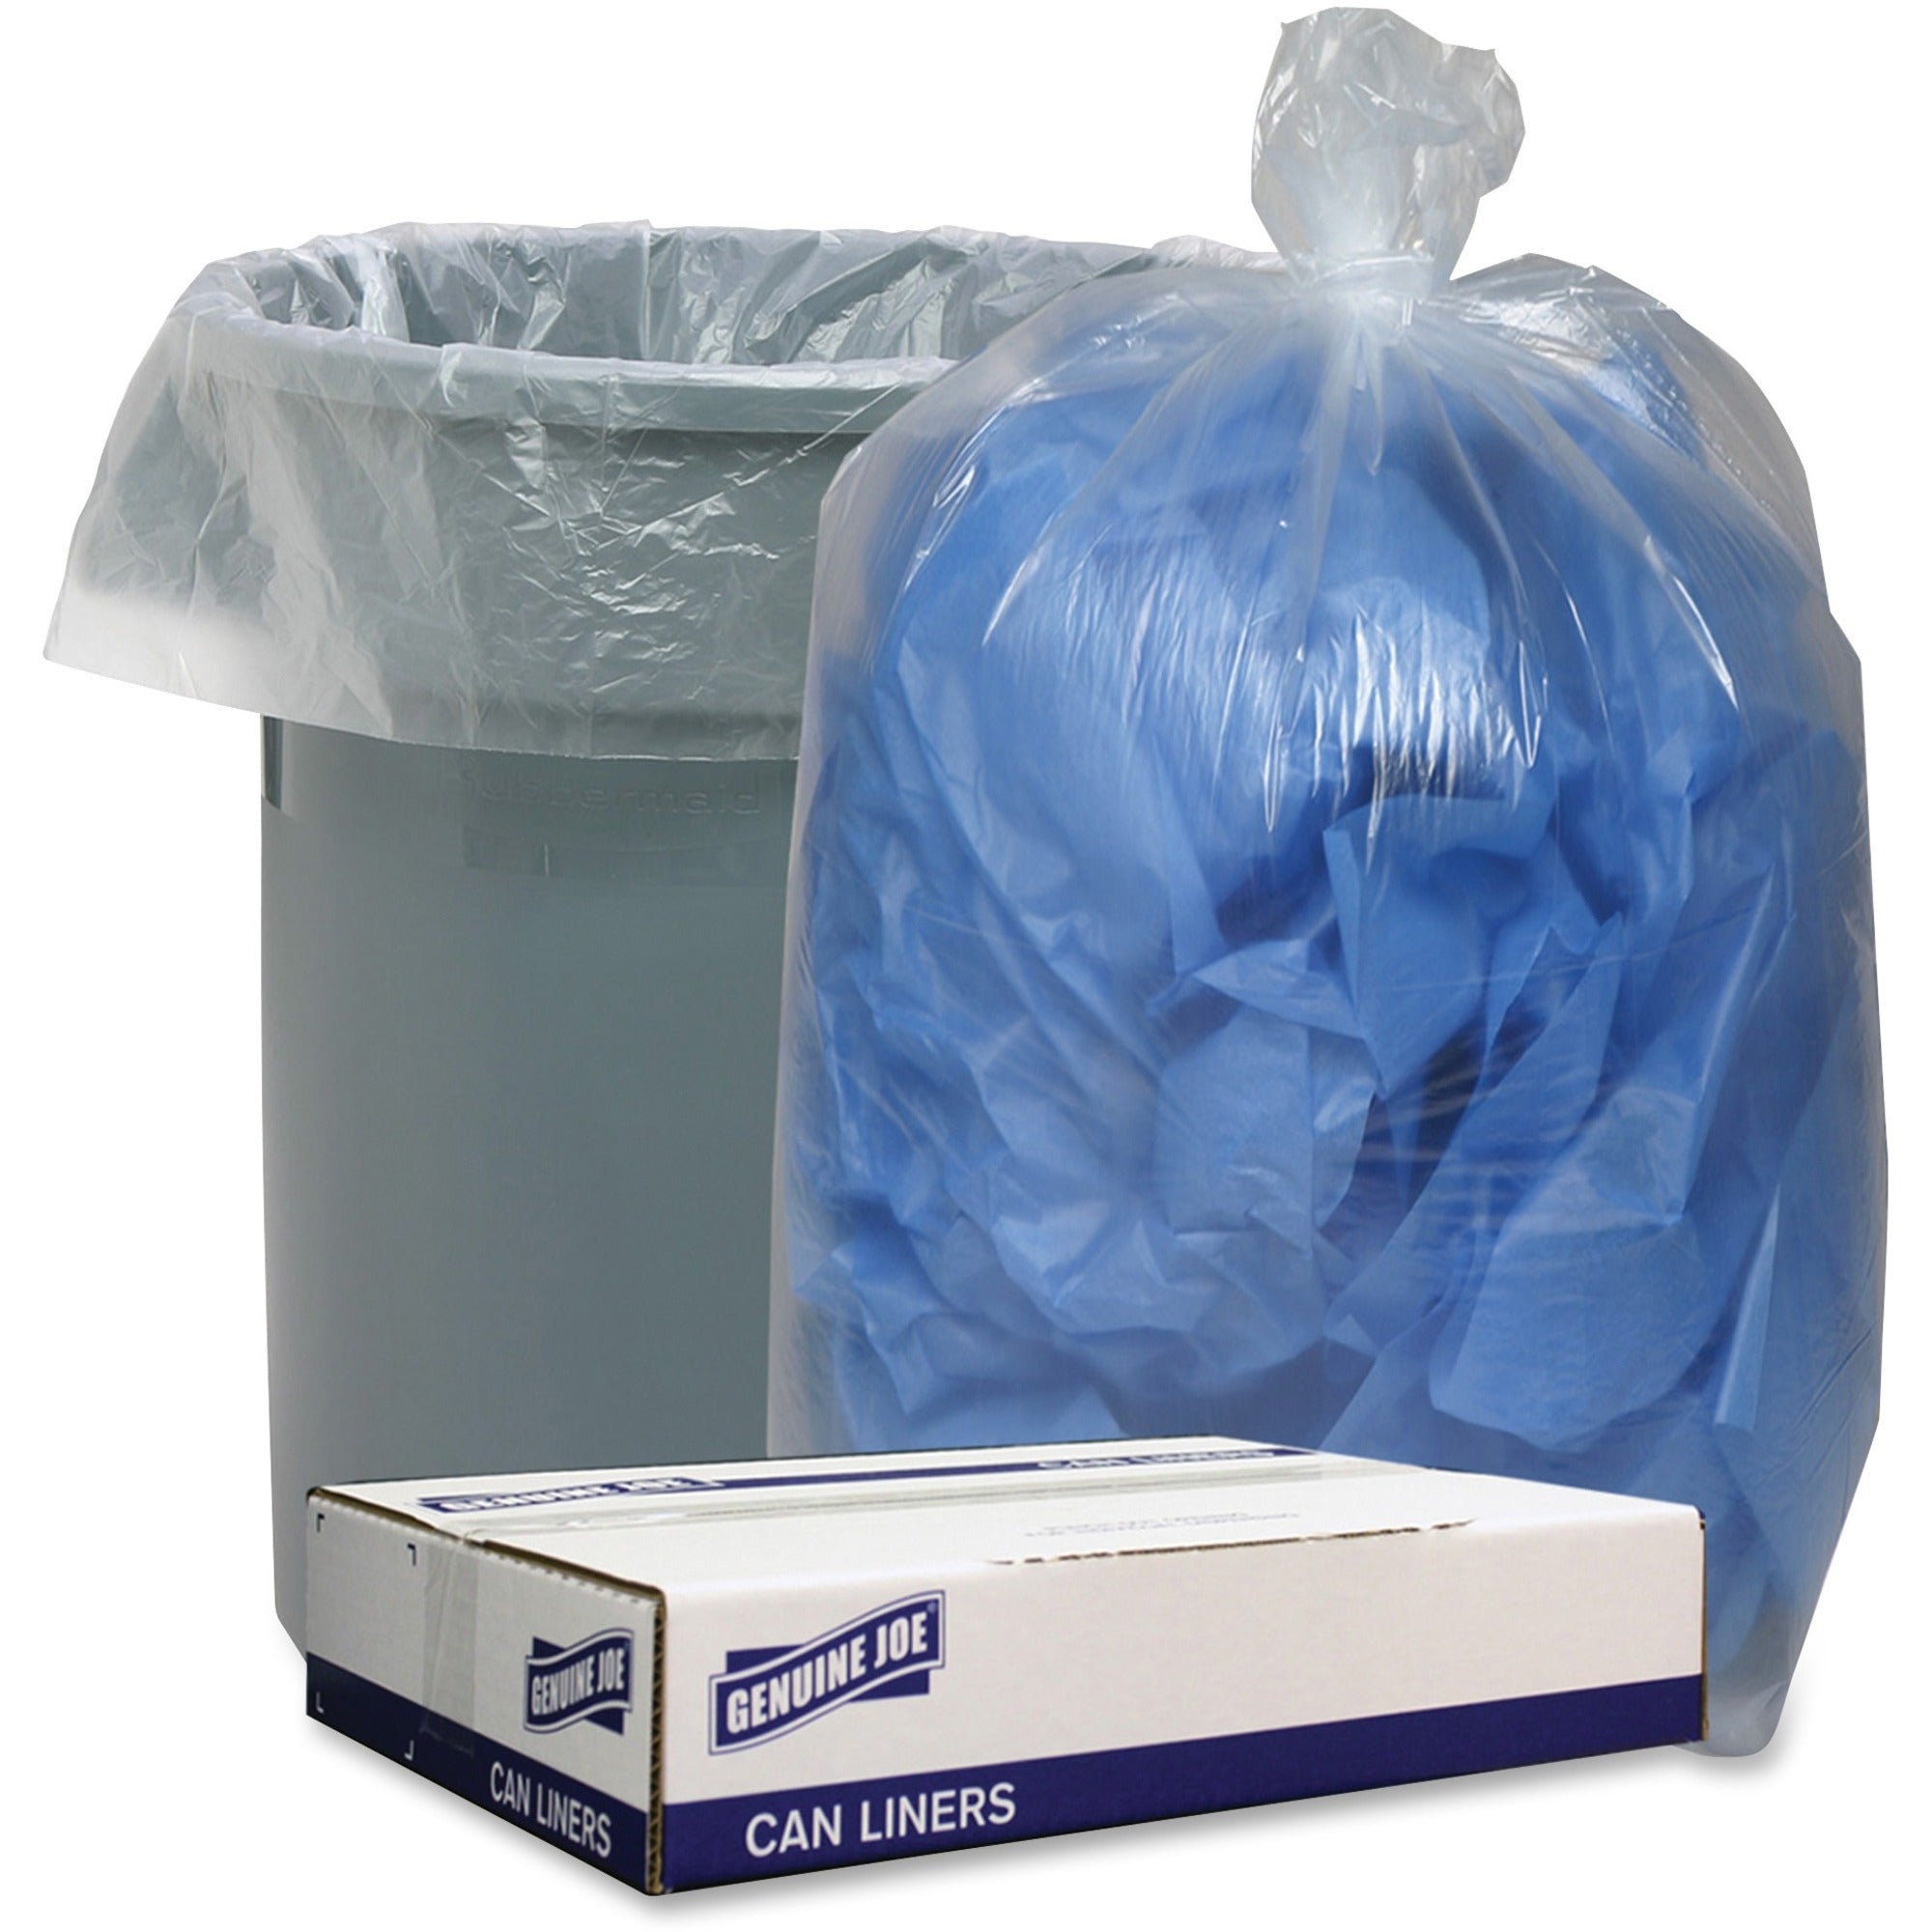 genuine-joe-clear-low-density-can-liners-56-gal-capacity-43-width-x-47-length-110-mil-28-micron-thickness-low-density-clear-100-carton-recycled_gjo29128 - 1